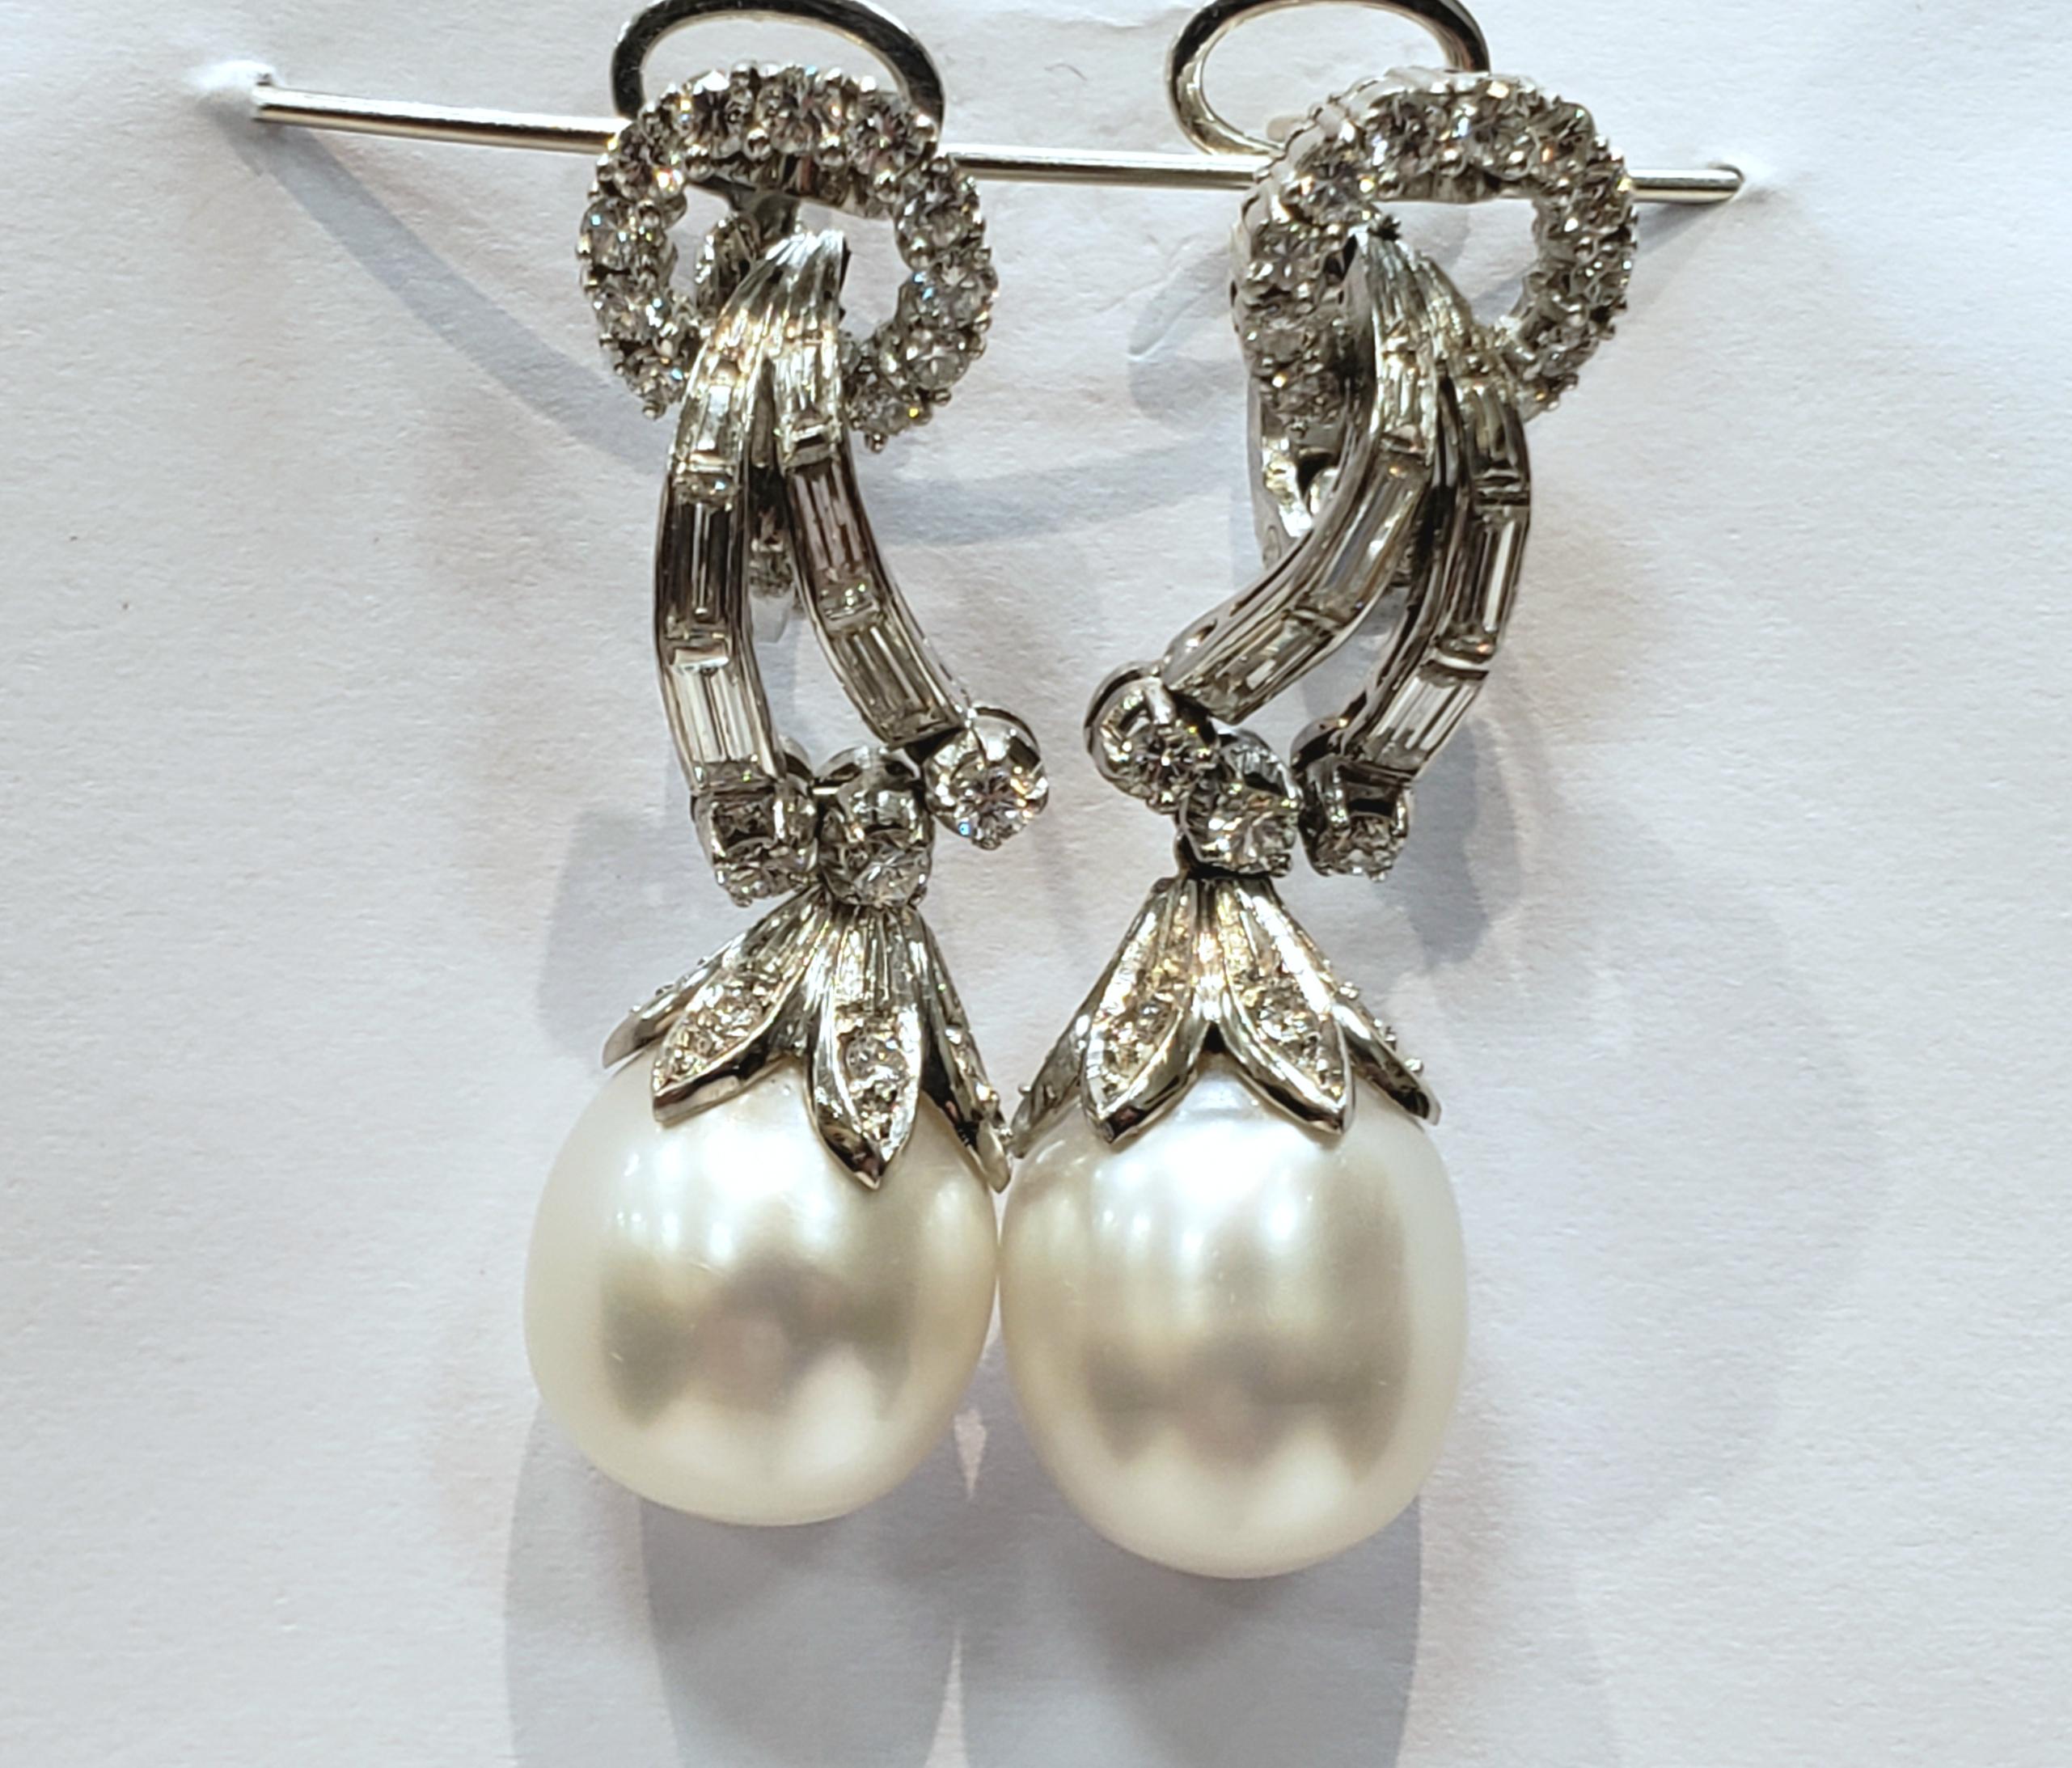 Elegant Platinum, Diamond and South Sea Pearl Drop Earrings.
Each earring has a circle of small round diamonds, with a double row of cascading baguettes, followed by three round diamonds, a platinum cap and a white oval South Sea pearl. Earrings